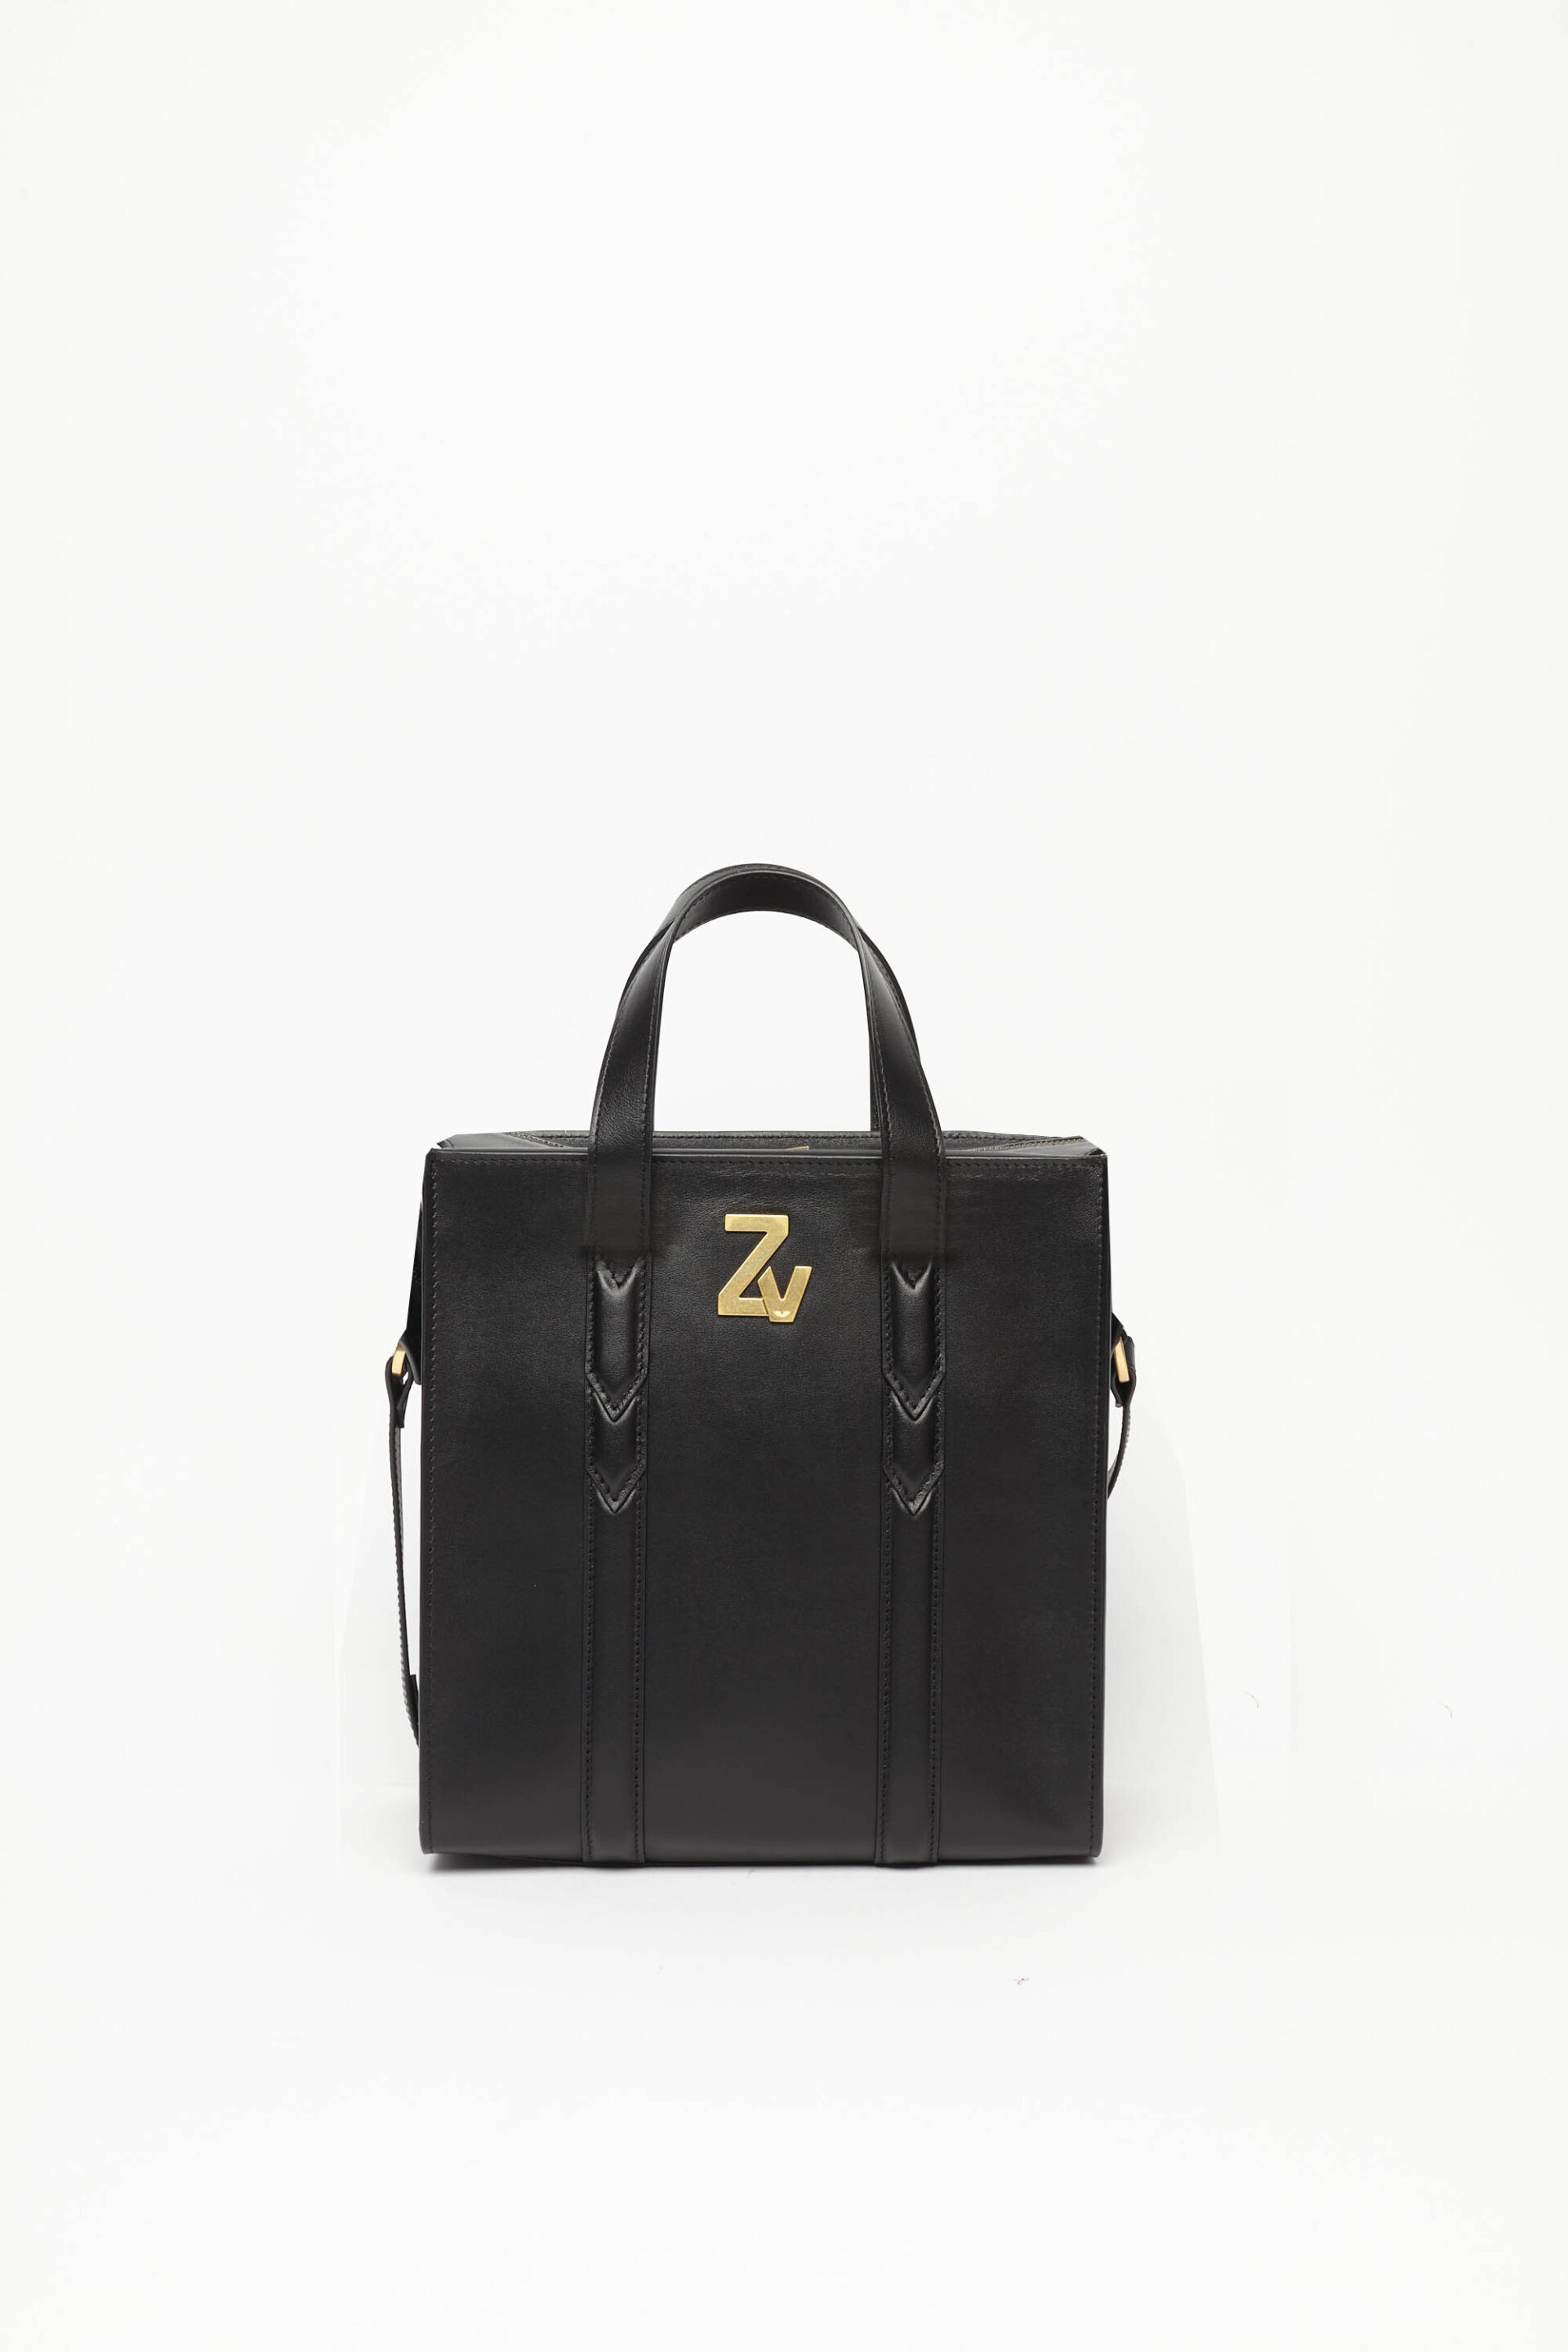 Zv Initiale Le Tote Monogram Bag by Zadig & Voltaire at ORCHARD MILE